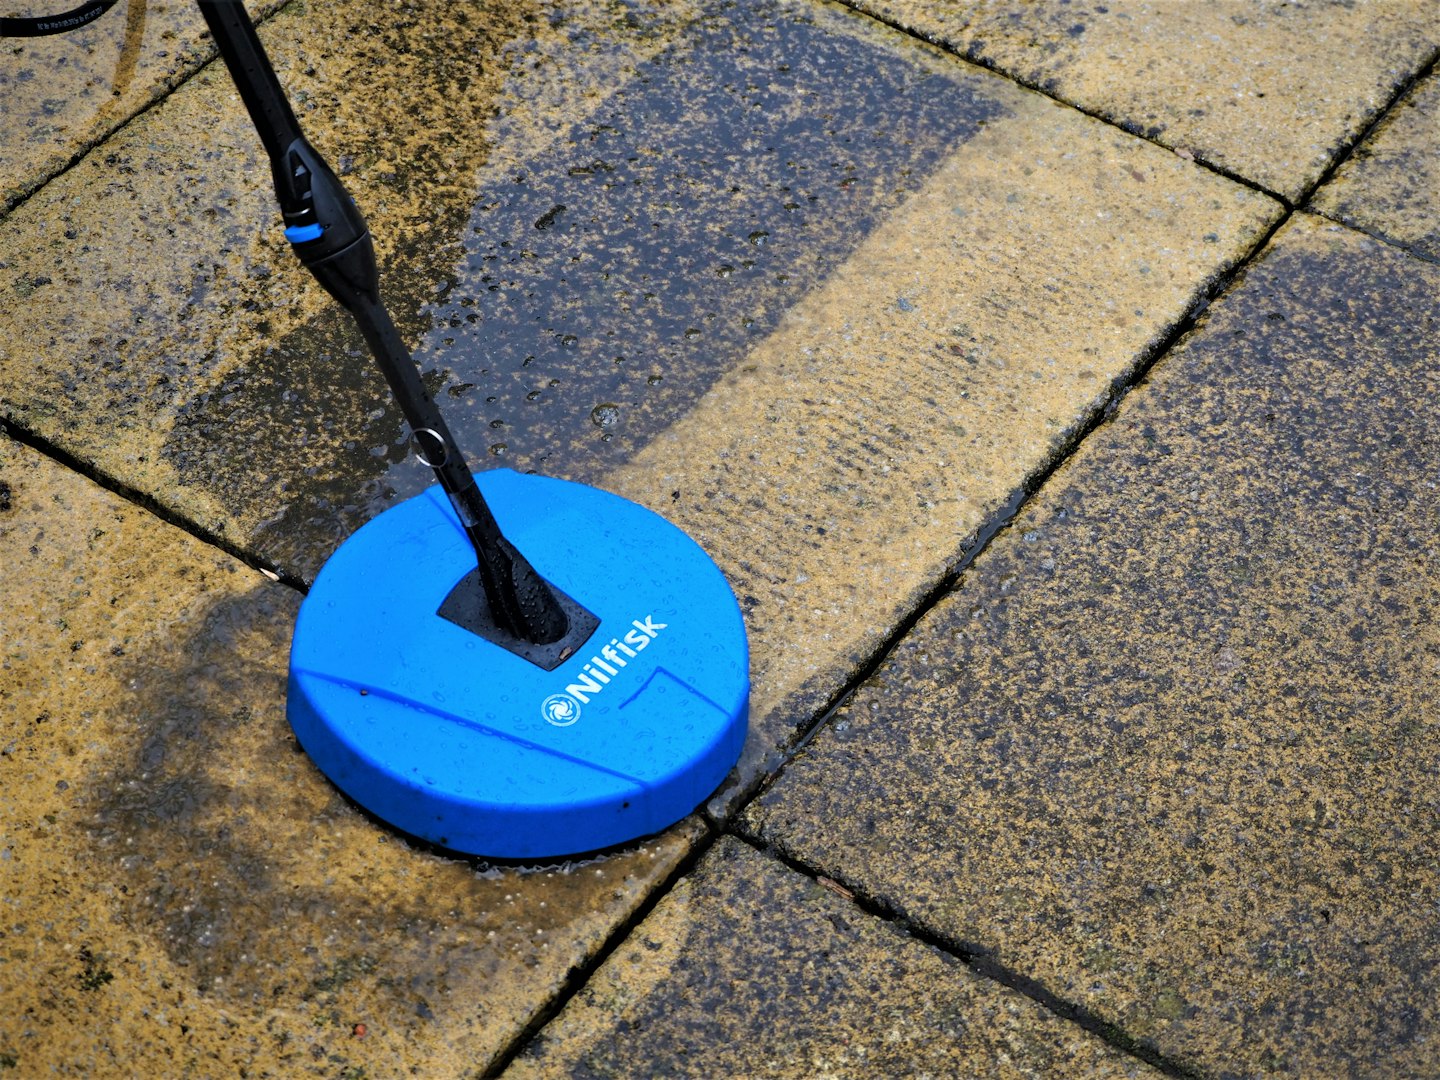 Nilfisk patio cleaner attachment cleaning a patio